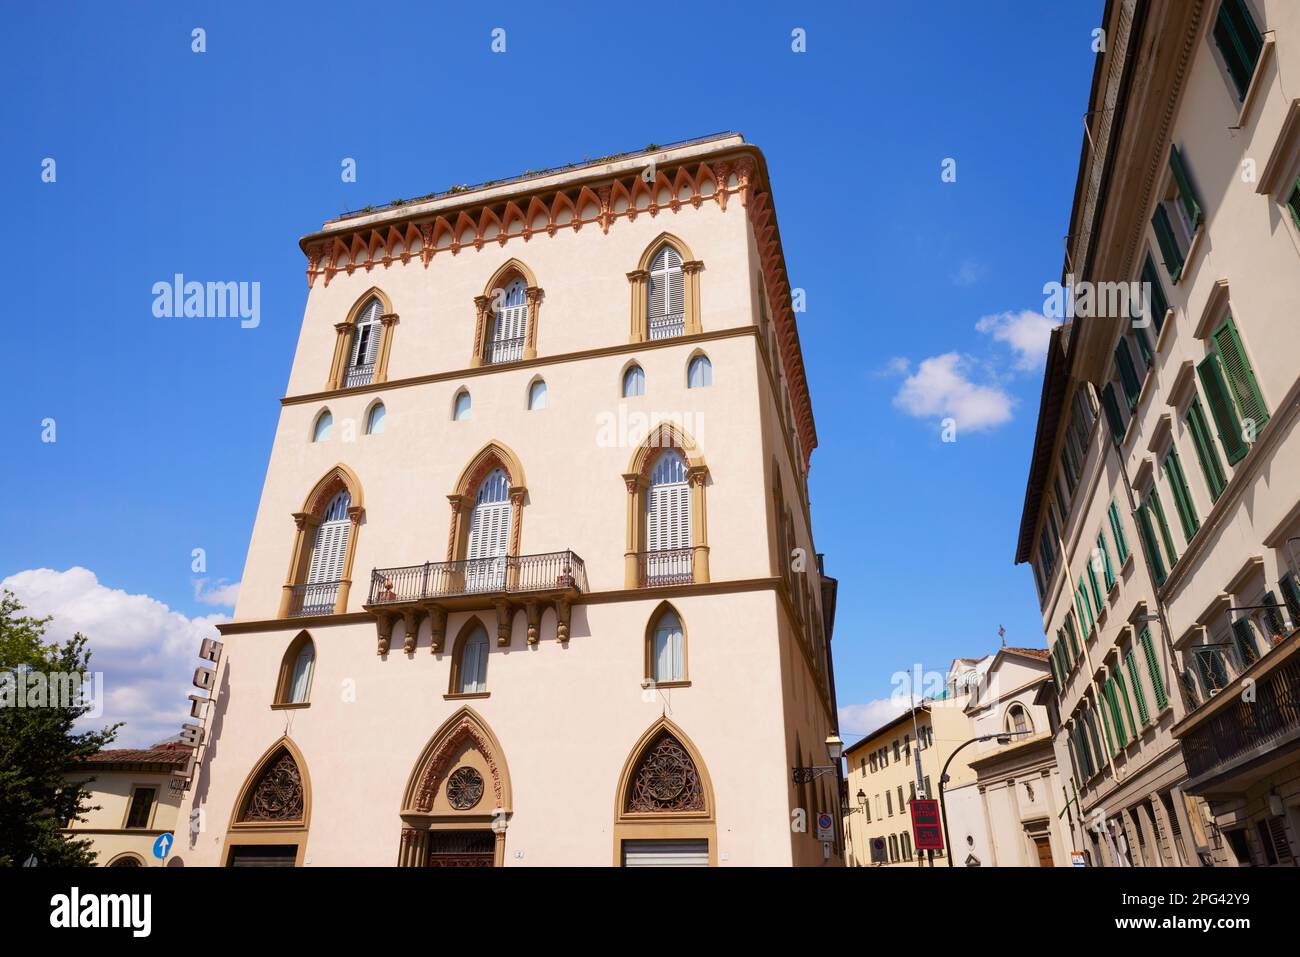 Example of Florentine architecture, Florence, Italy Stock Photo